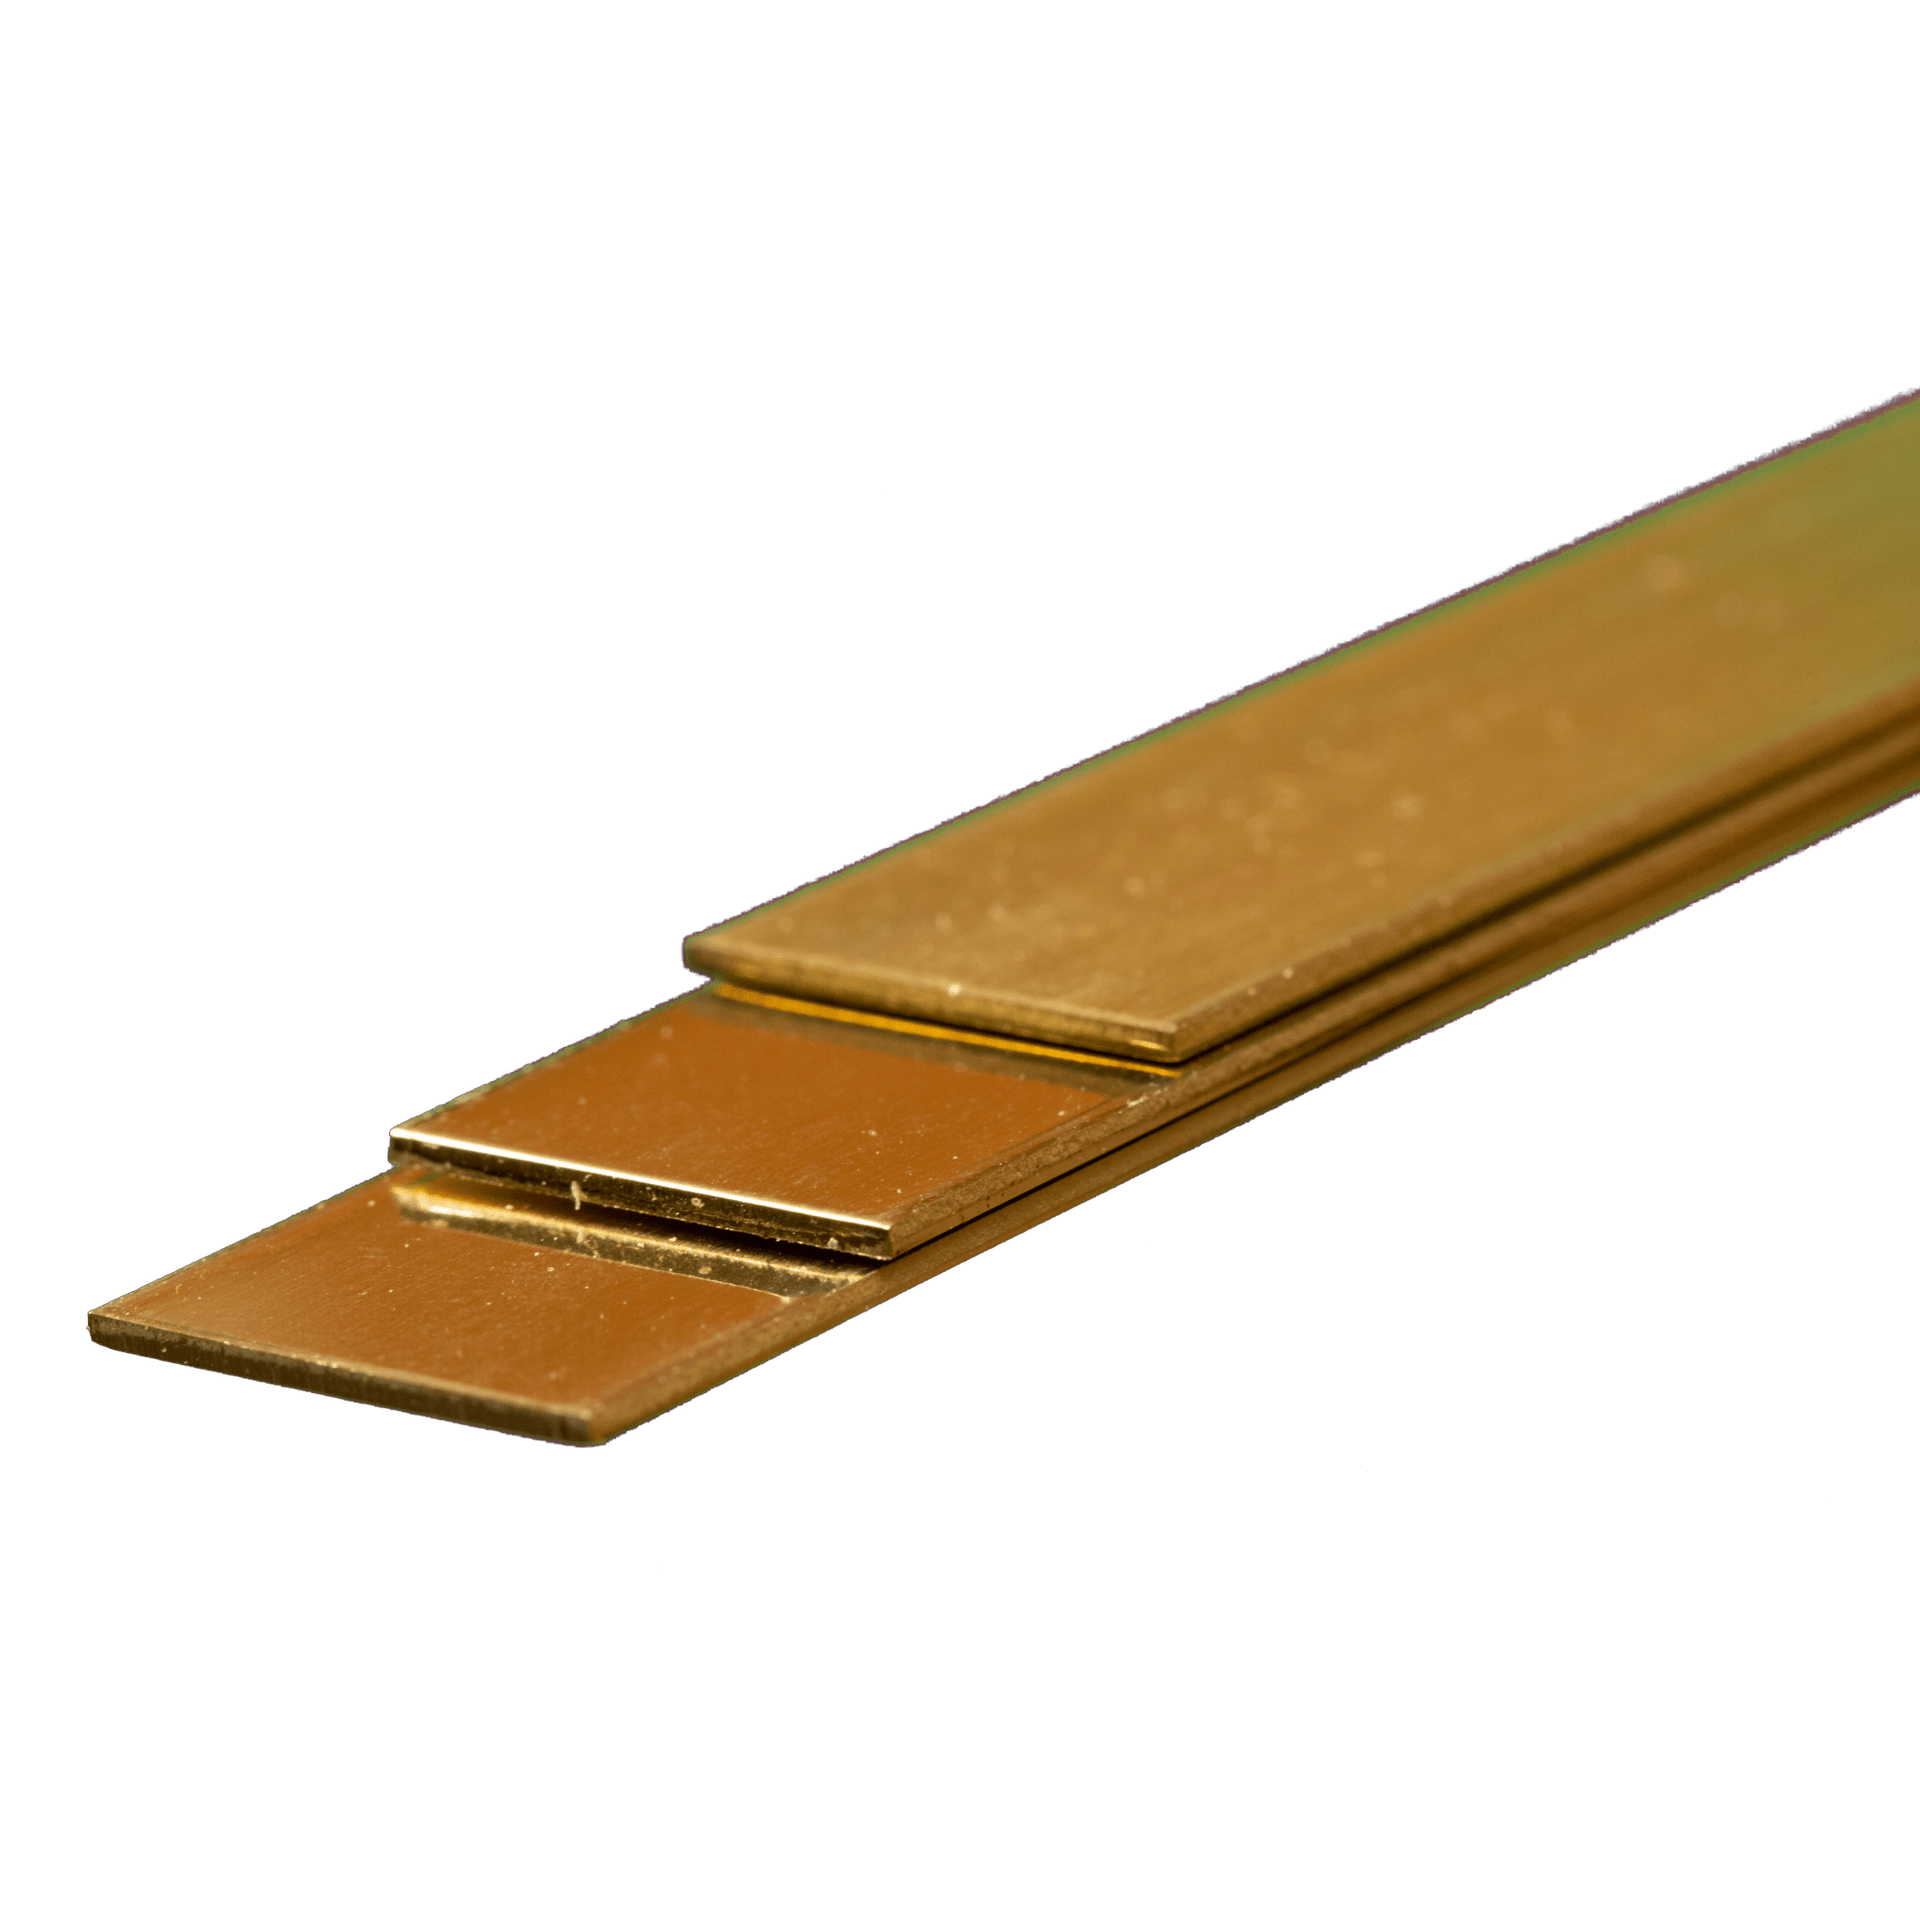 1mm OD X .225mm Wall Thin Wall Brass Tube Pack of 4 300mm Long K&S  Engineering 9830 • Canada's largest selection of model paints, kits, hobby  tools, airbrushing, and crafts with online